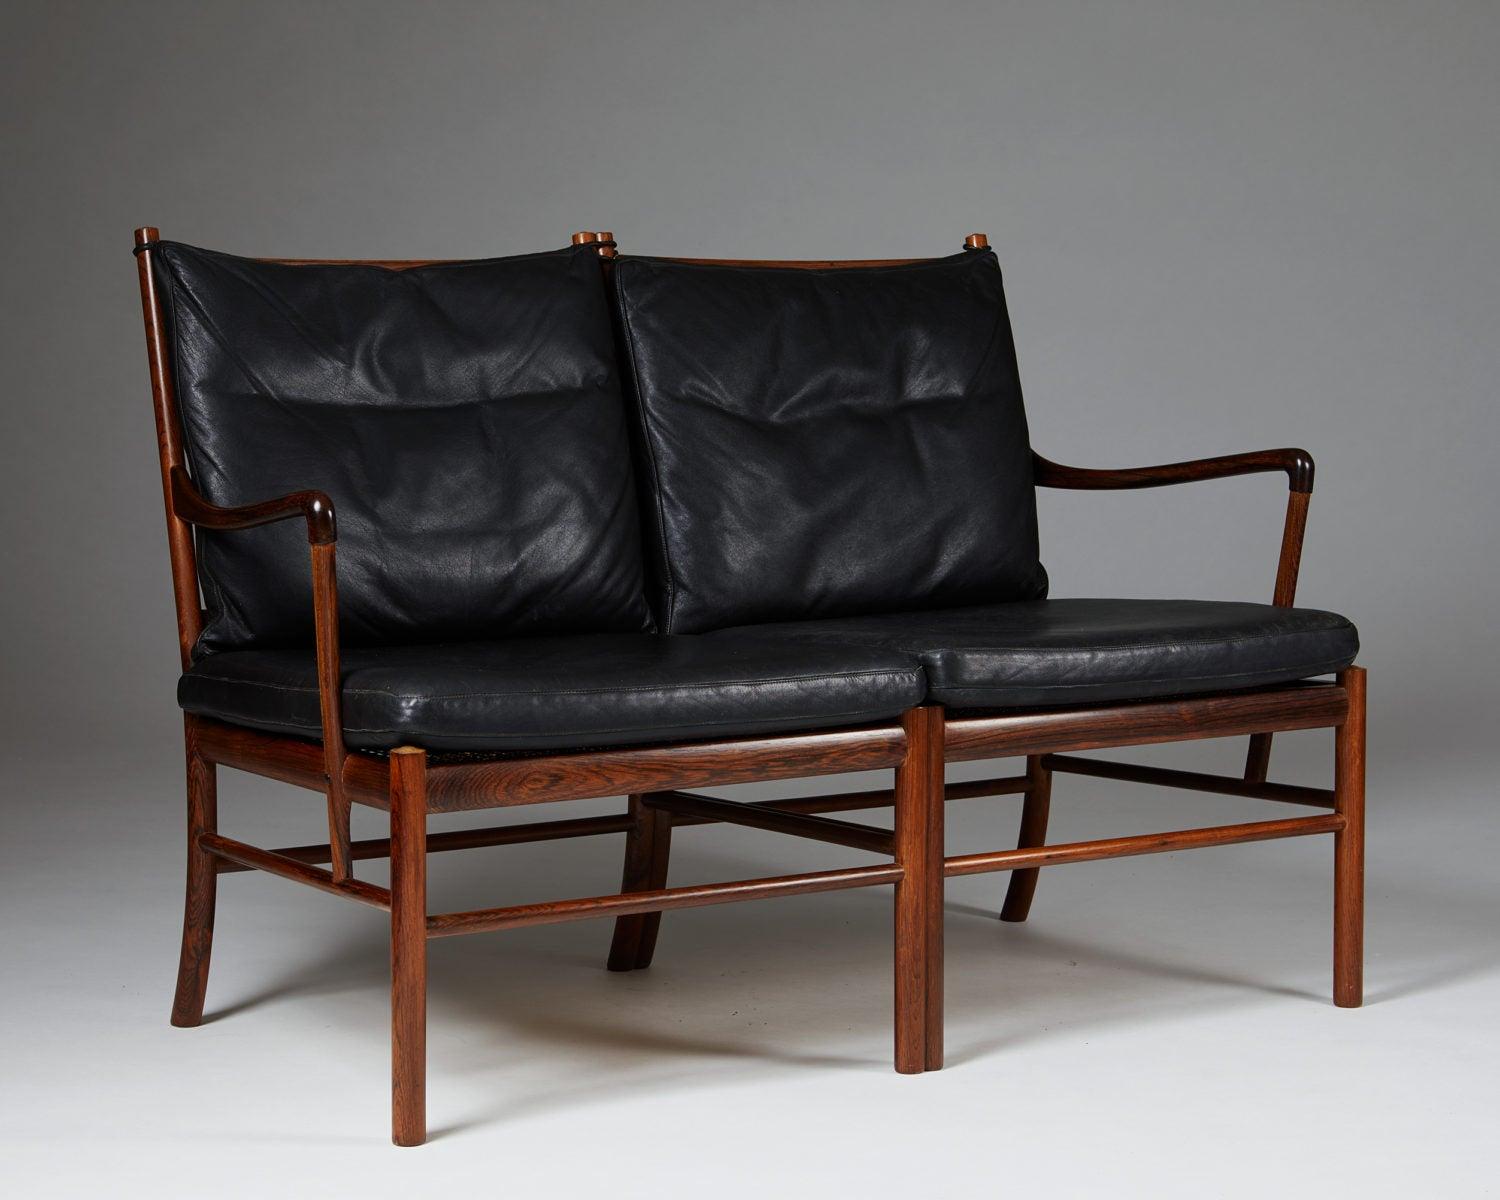 Mid-Century Modern Sofa “Colonial” Designed by Ole Wanscher for P. Jeppesen, Denmark, 1950s For Sale